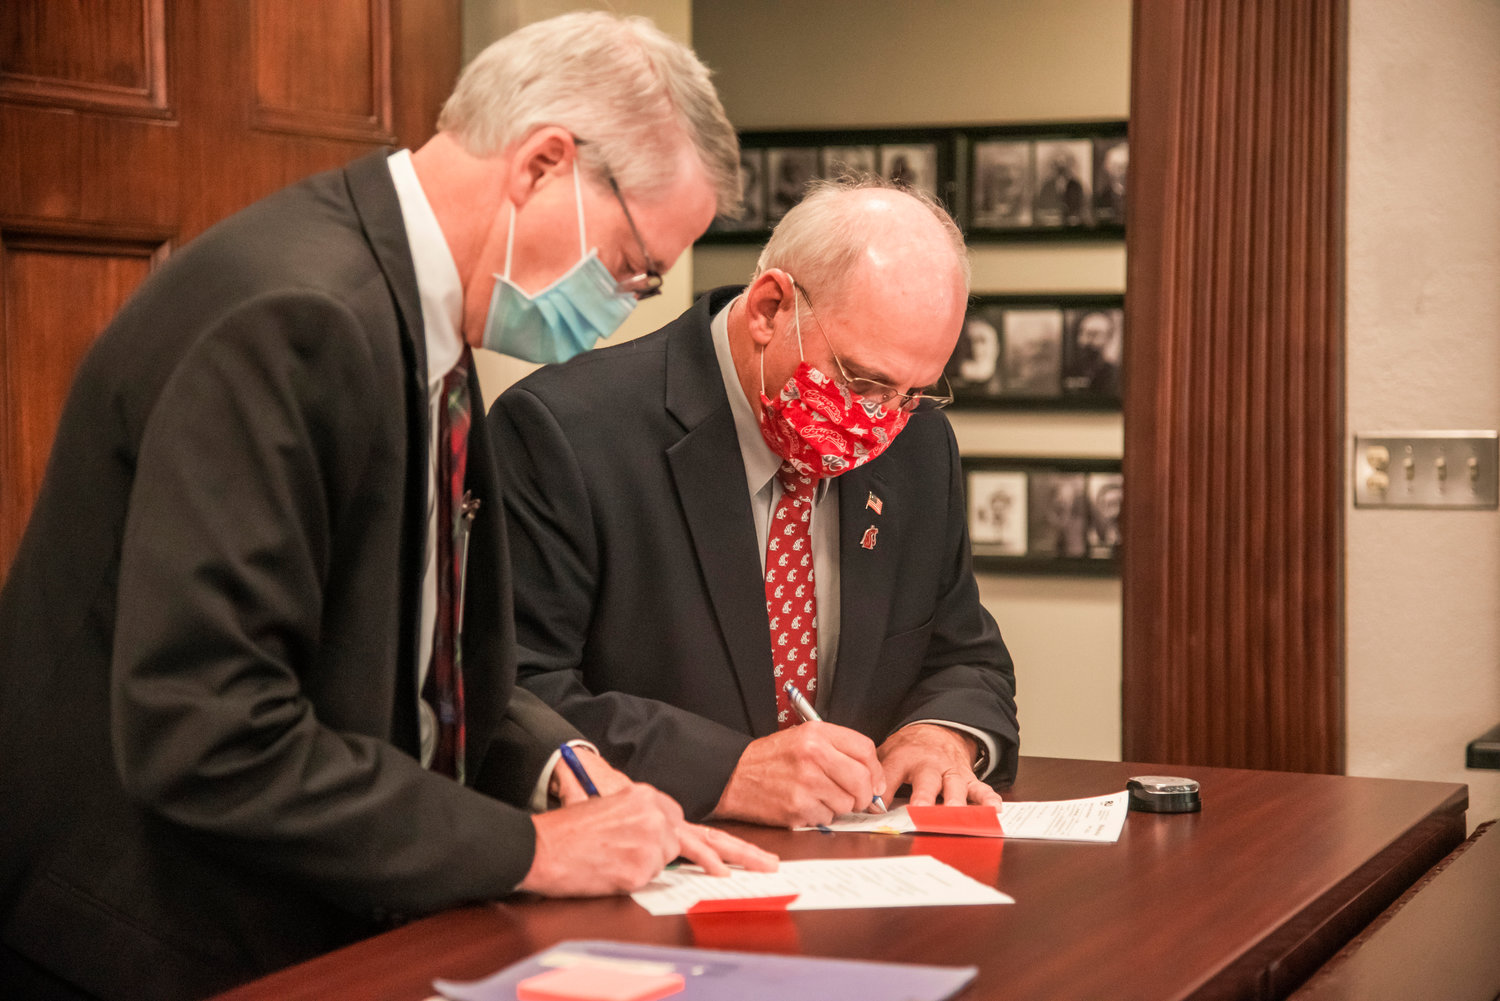 Judge James Lawler signs papers alongside Commissioner Lee Grose following a swearing in ceremony Wednesday morning at the Lewis County Courthouse in Chehalis.